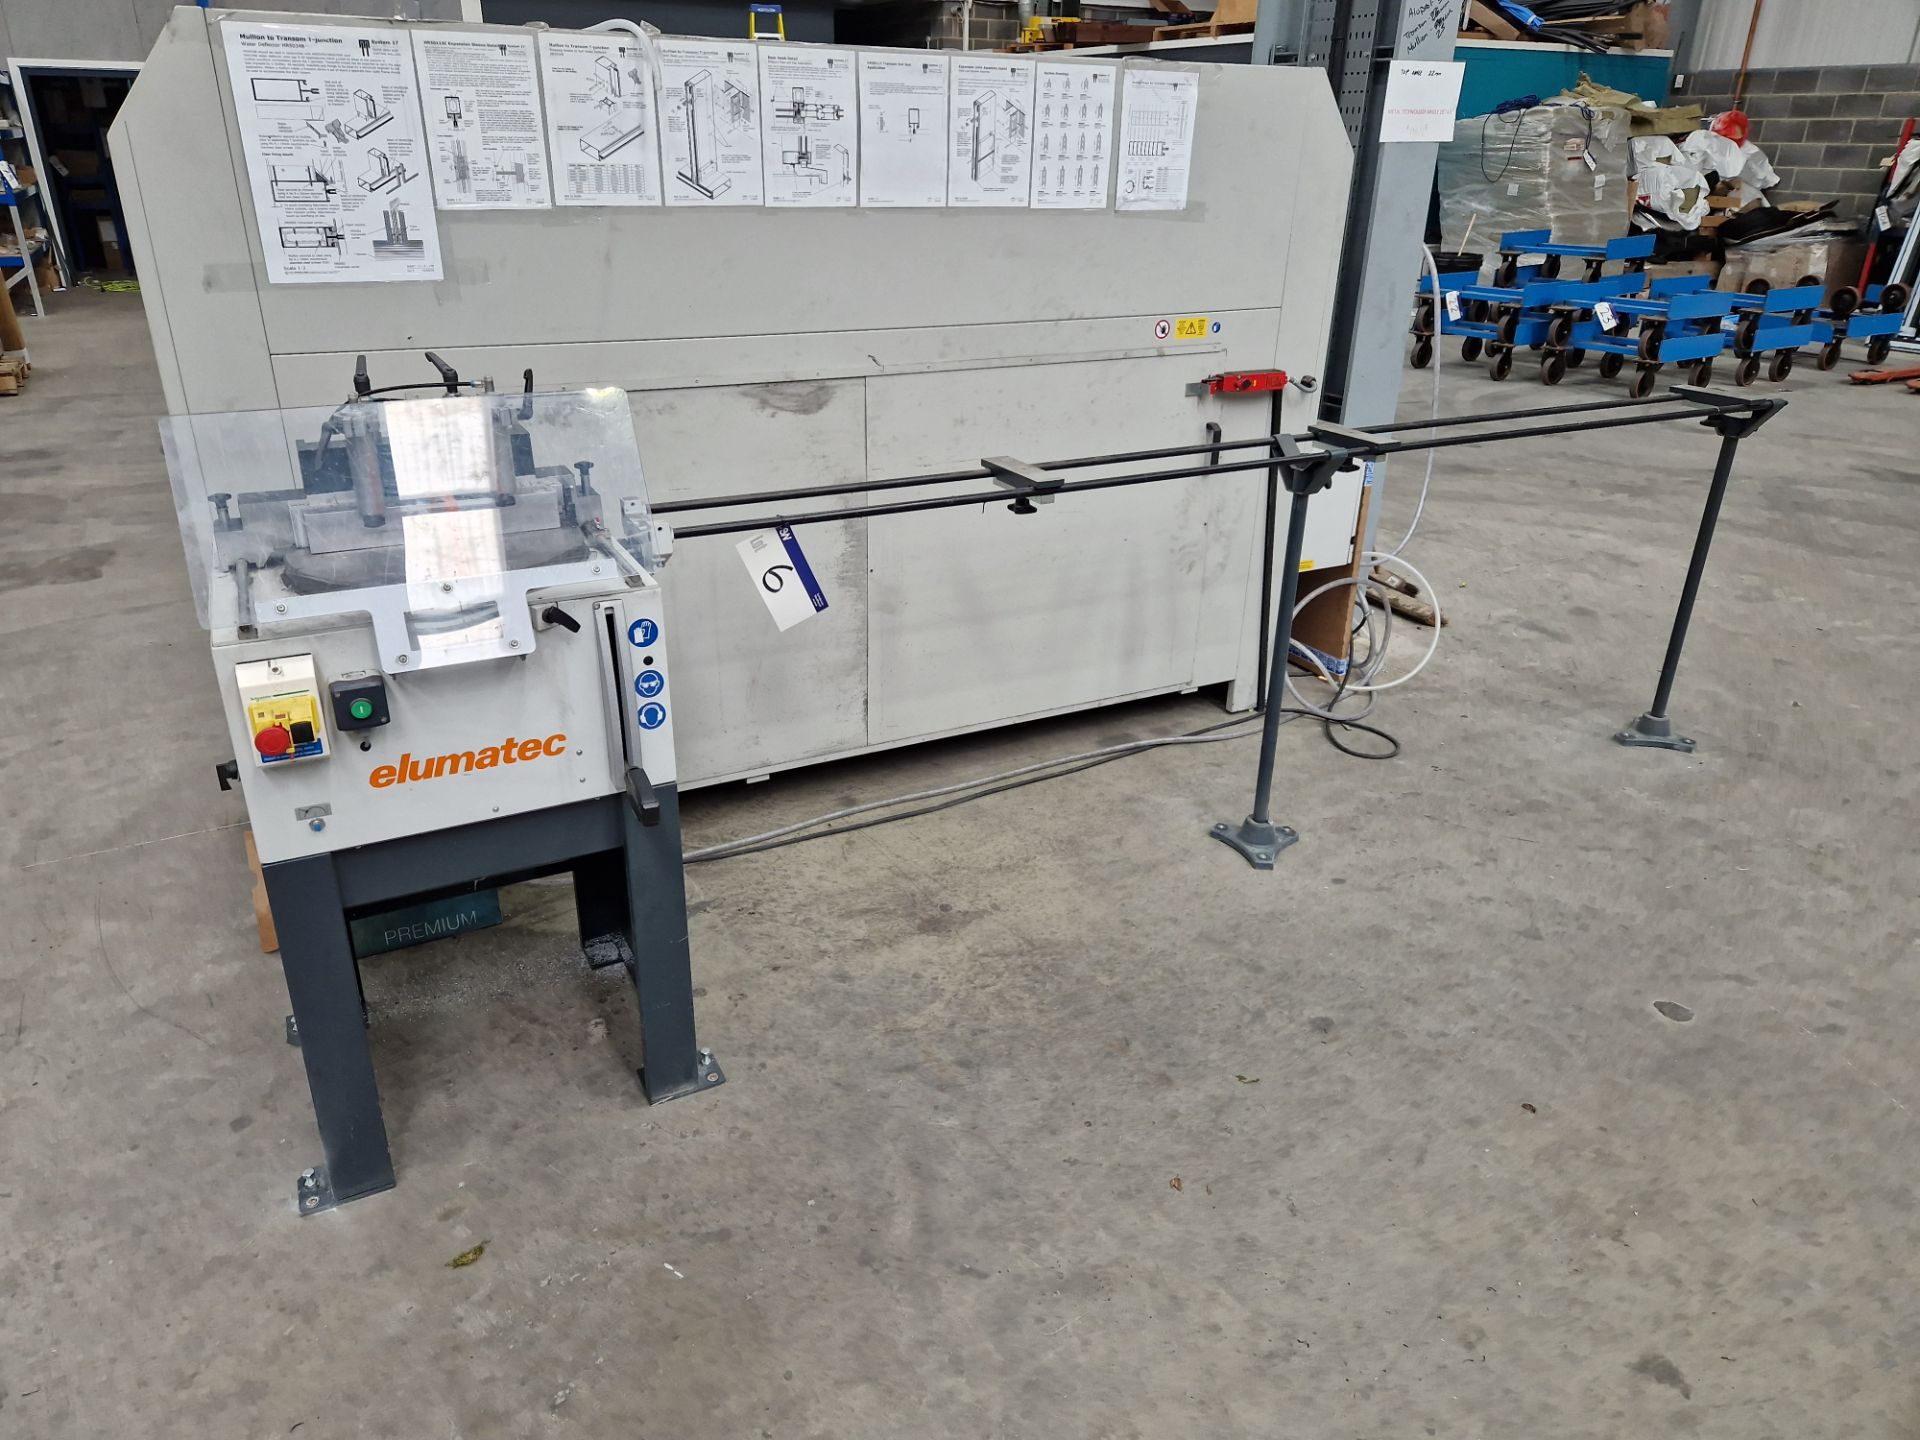 elumatec TS161/21 Upstroking Saw, Serial No. 161000020, Year of Manufacture 2019 with 3m